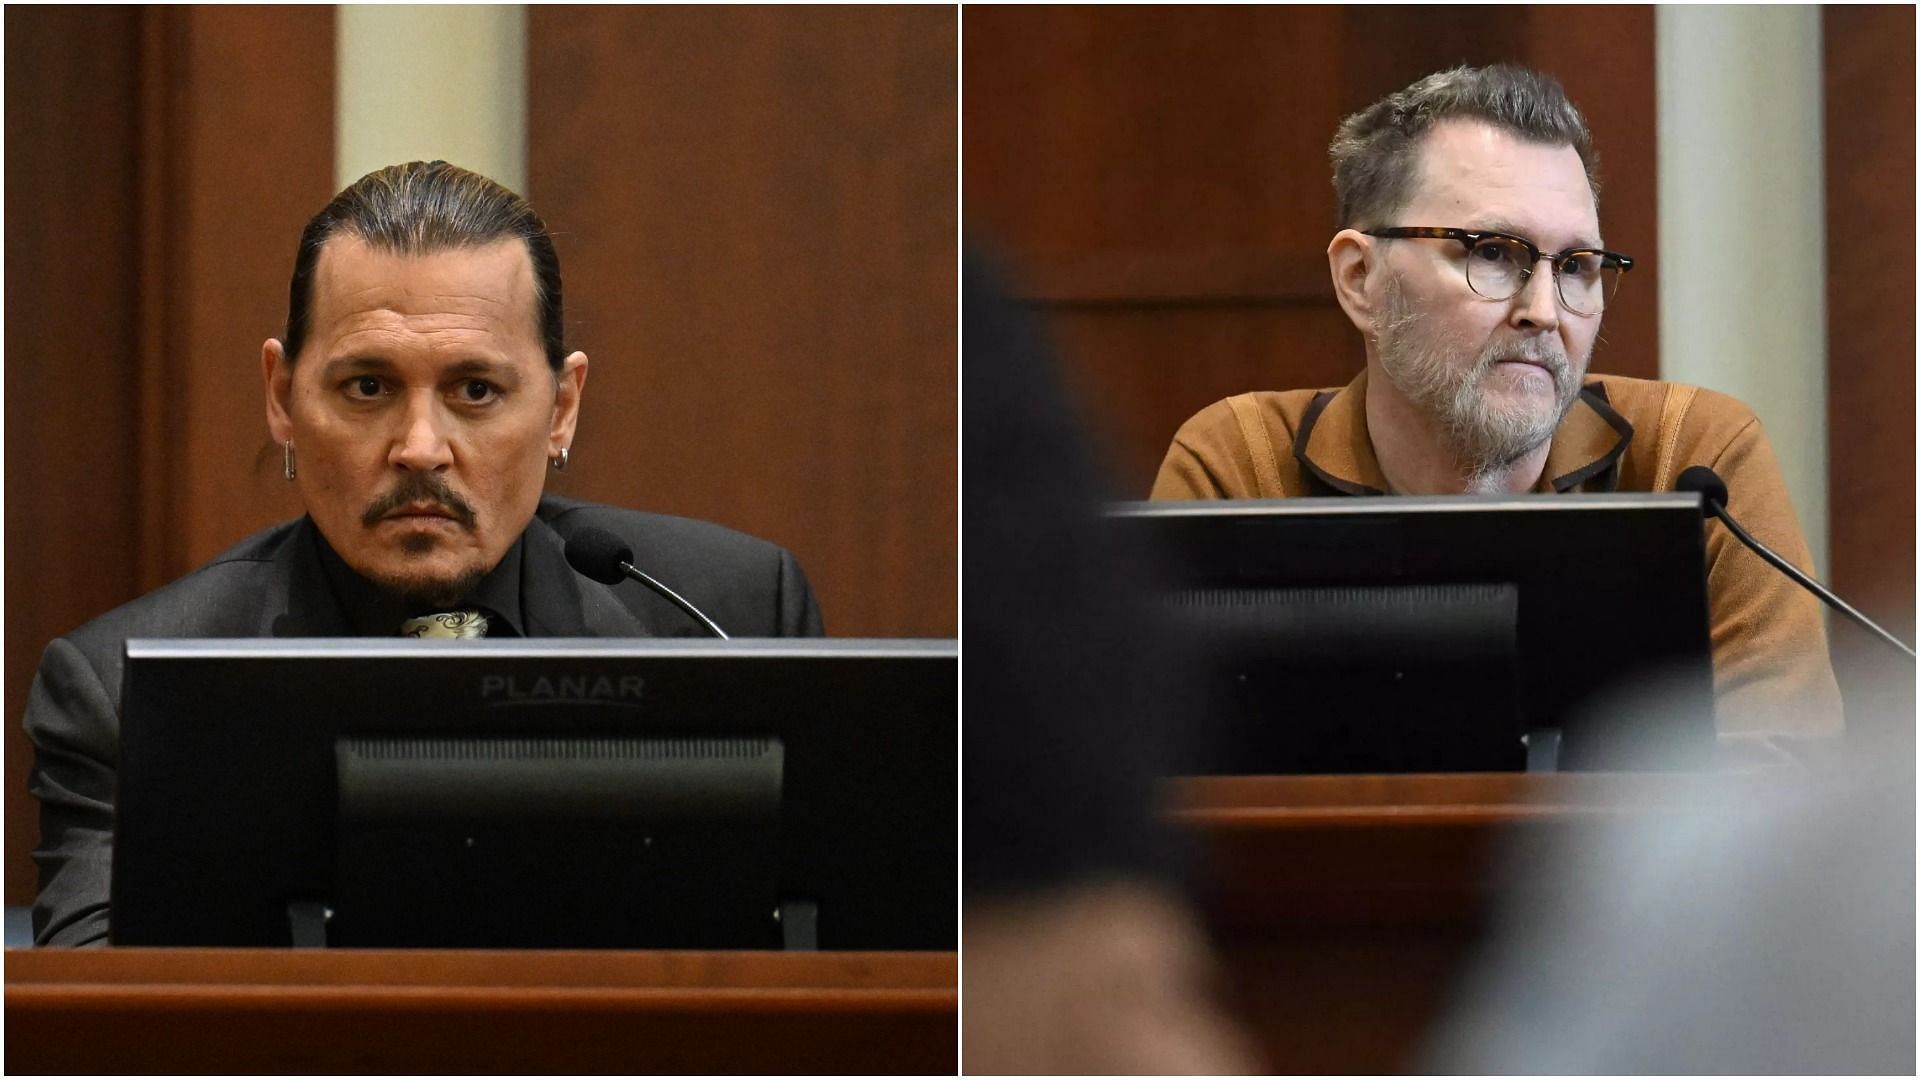 Johnny Depp and Morgan Night in court (Image via Jim Watson/Pool/AFP/Getty Images)